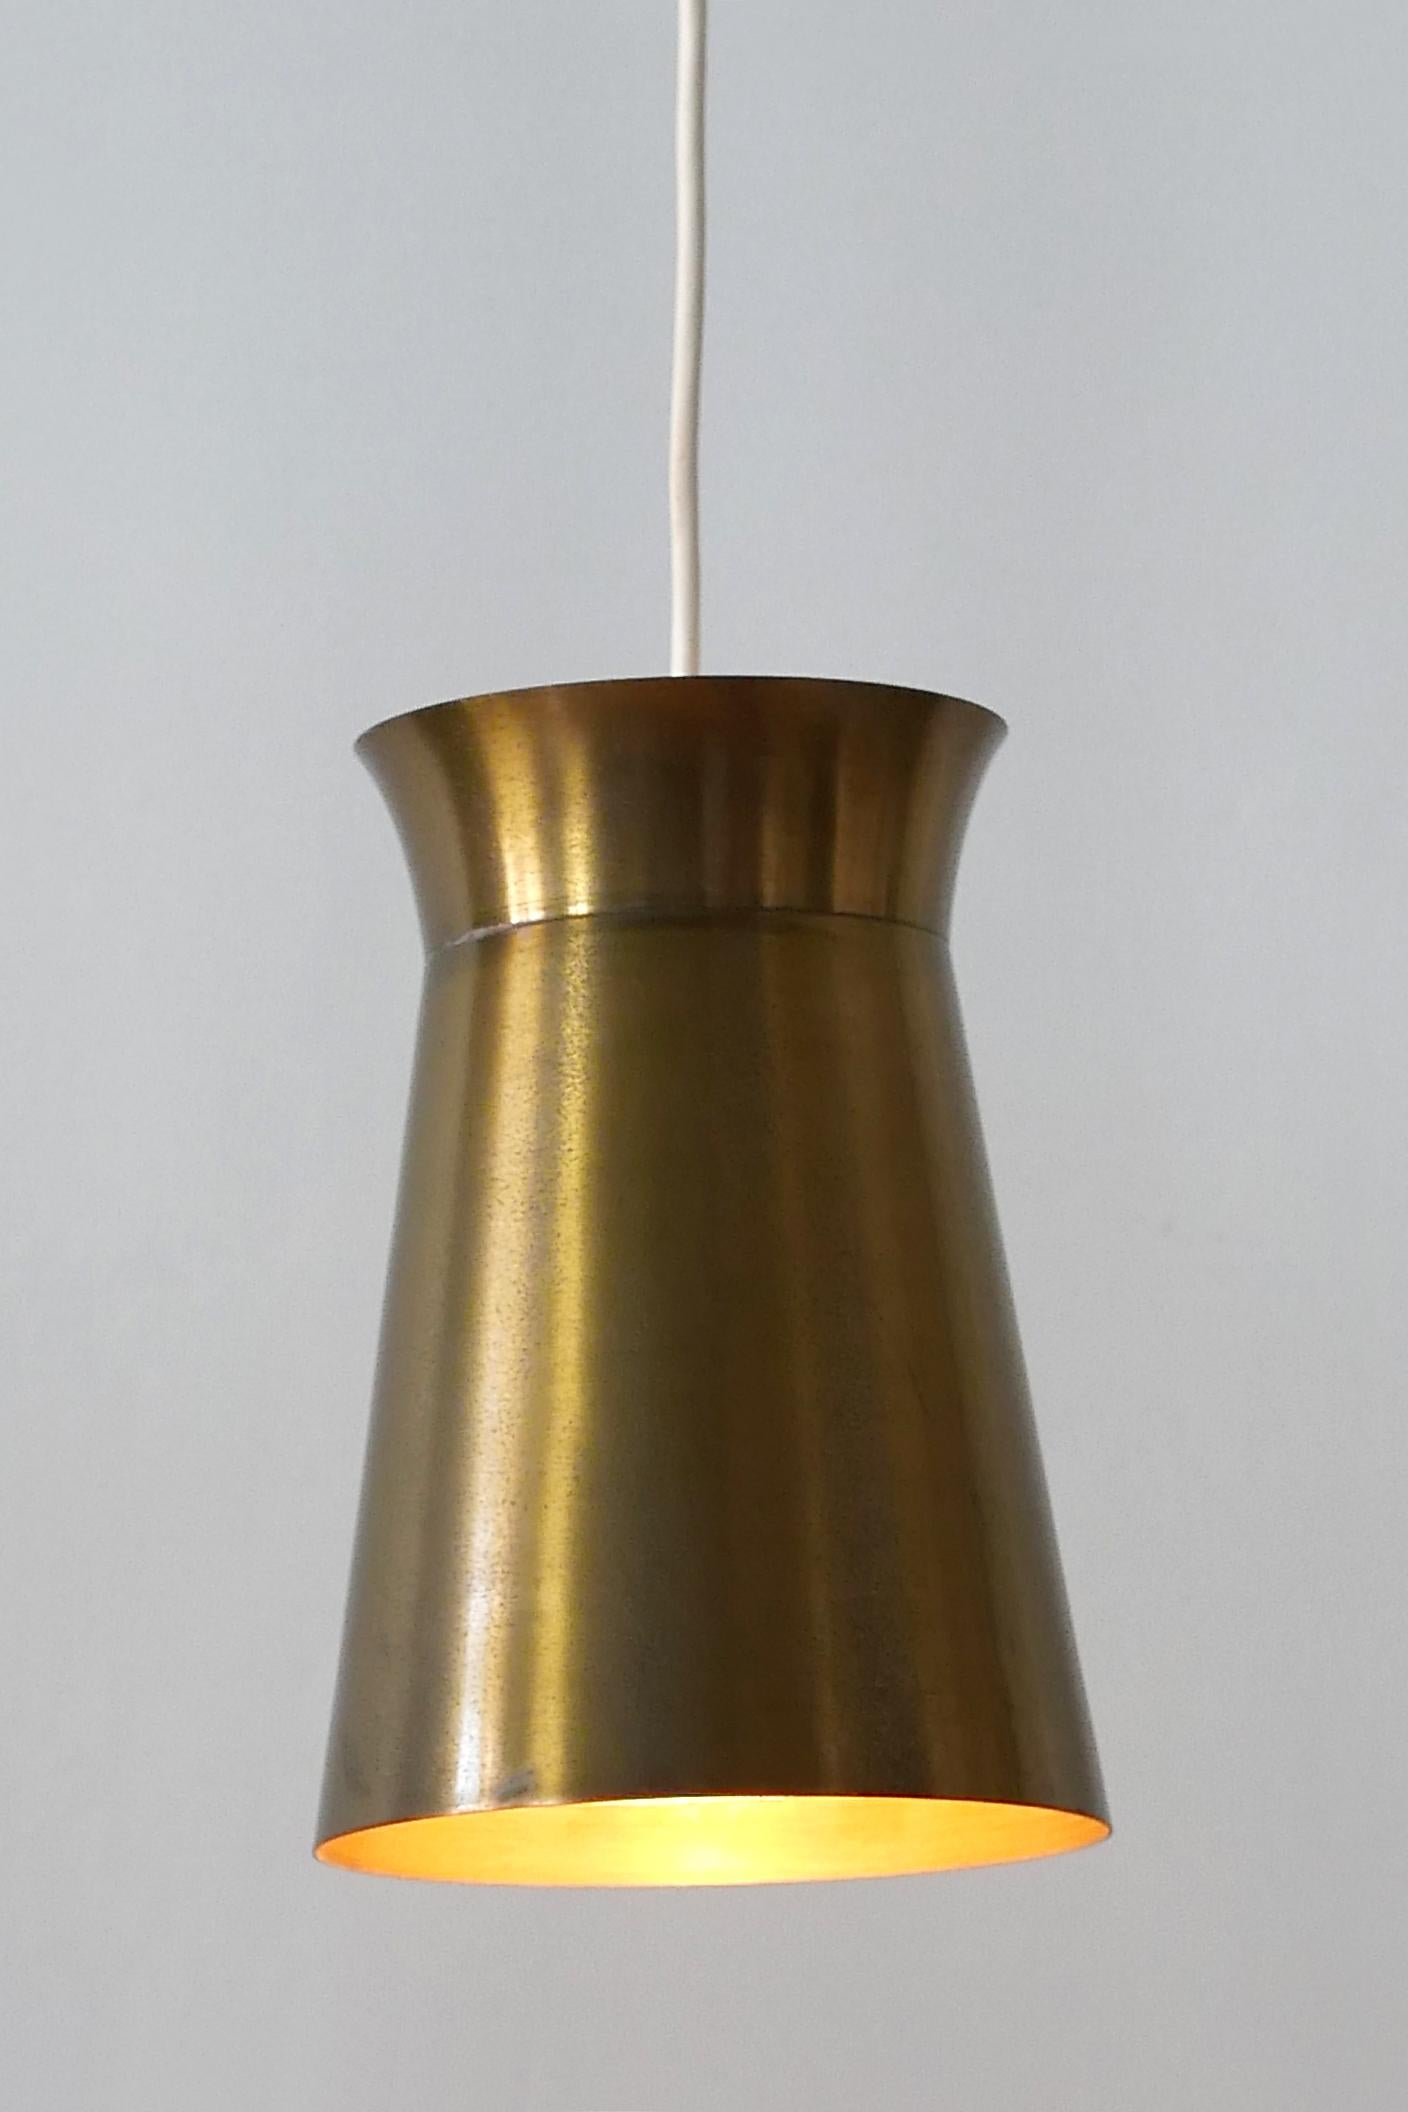 Elegant Mid-Century Modern Brass Pendant Lamps or Hanging Lights, 1950s, Germany For Sale 2